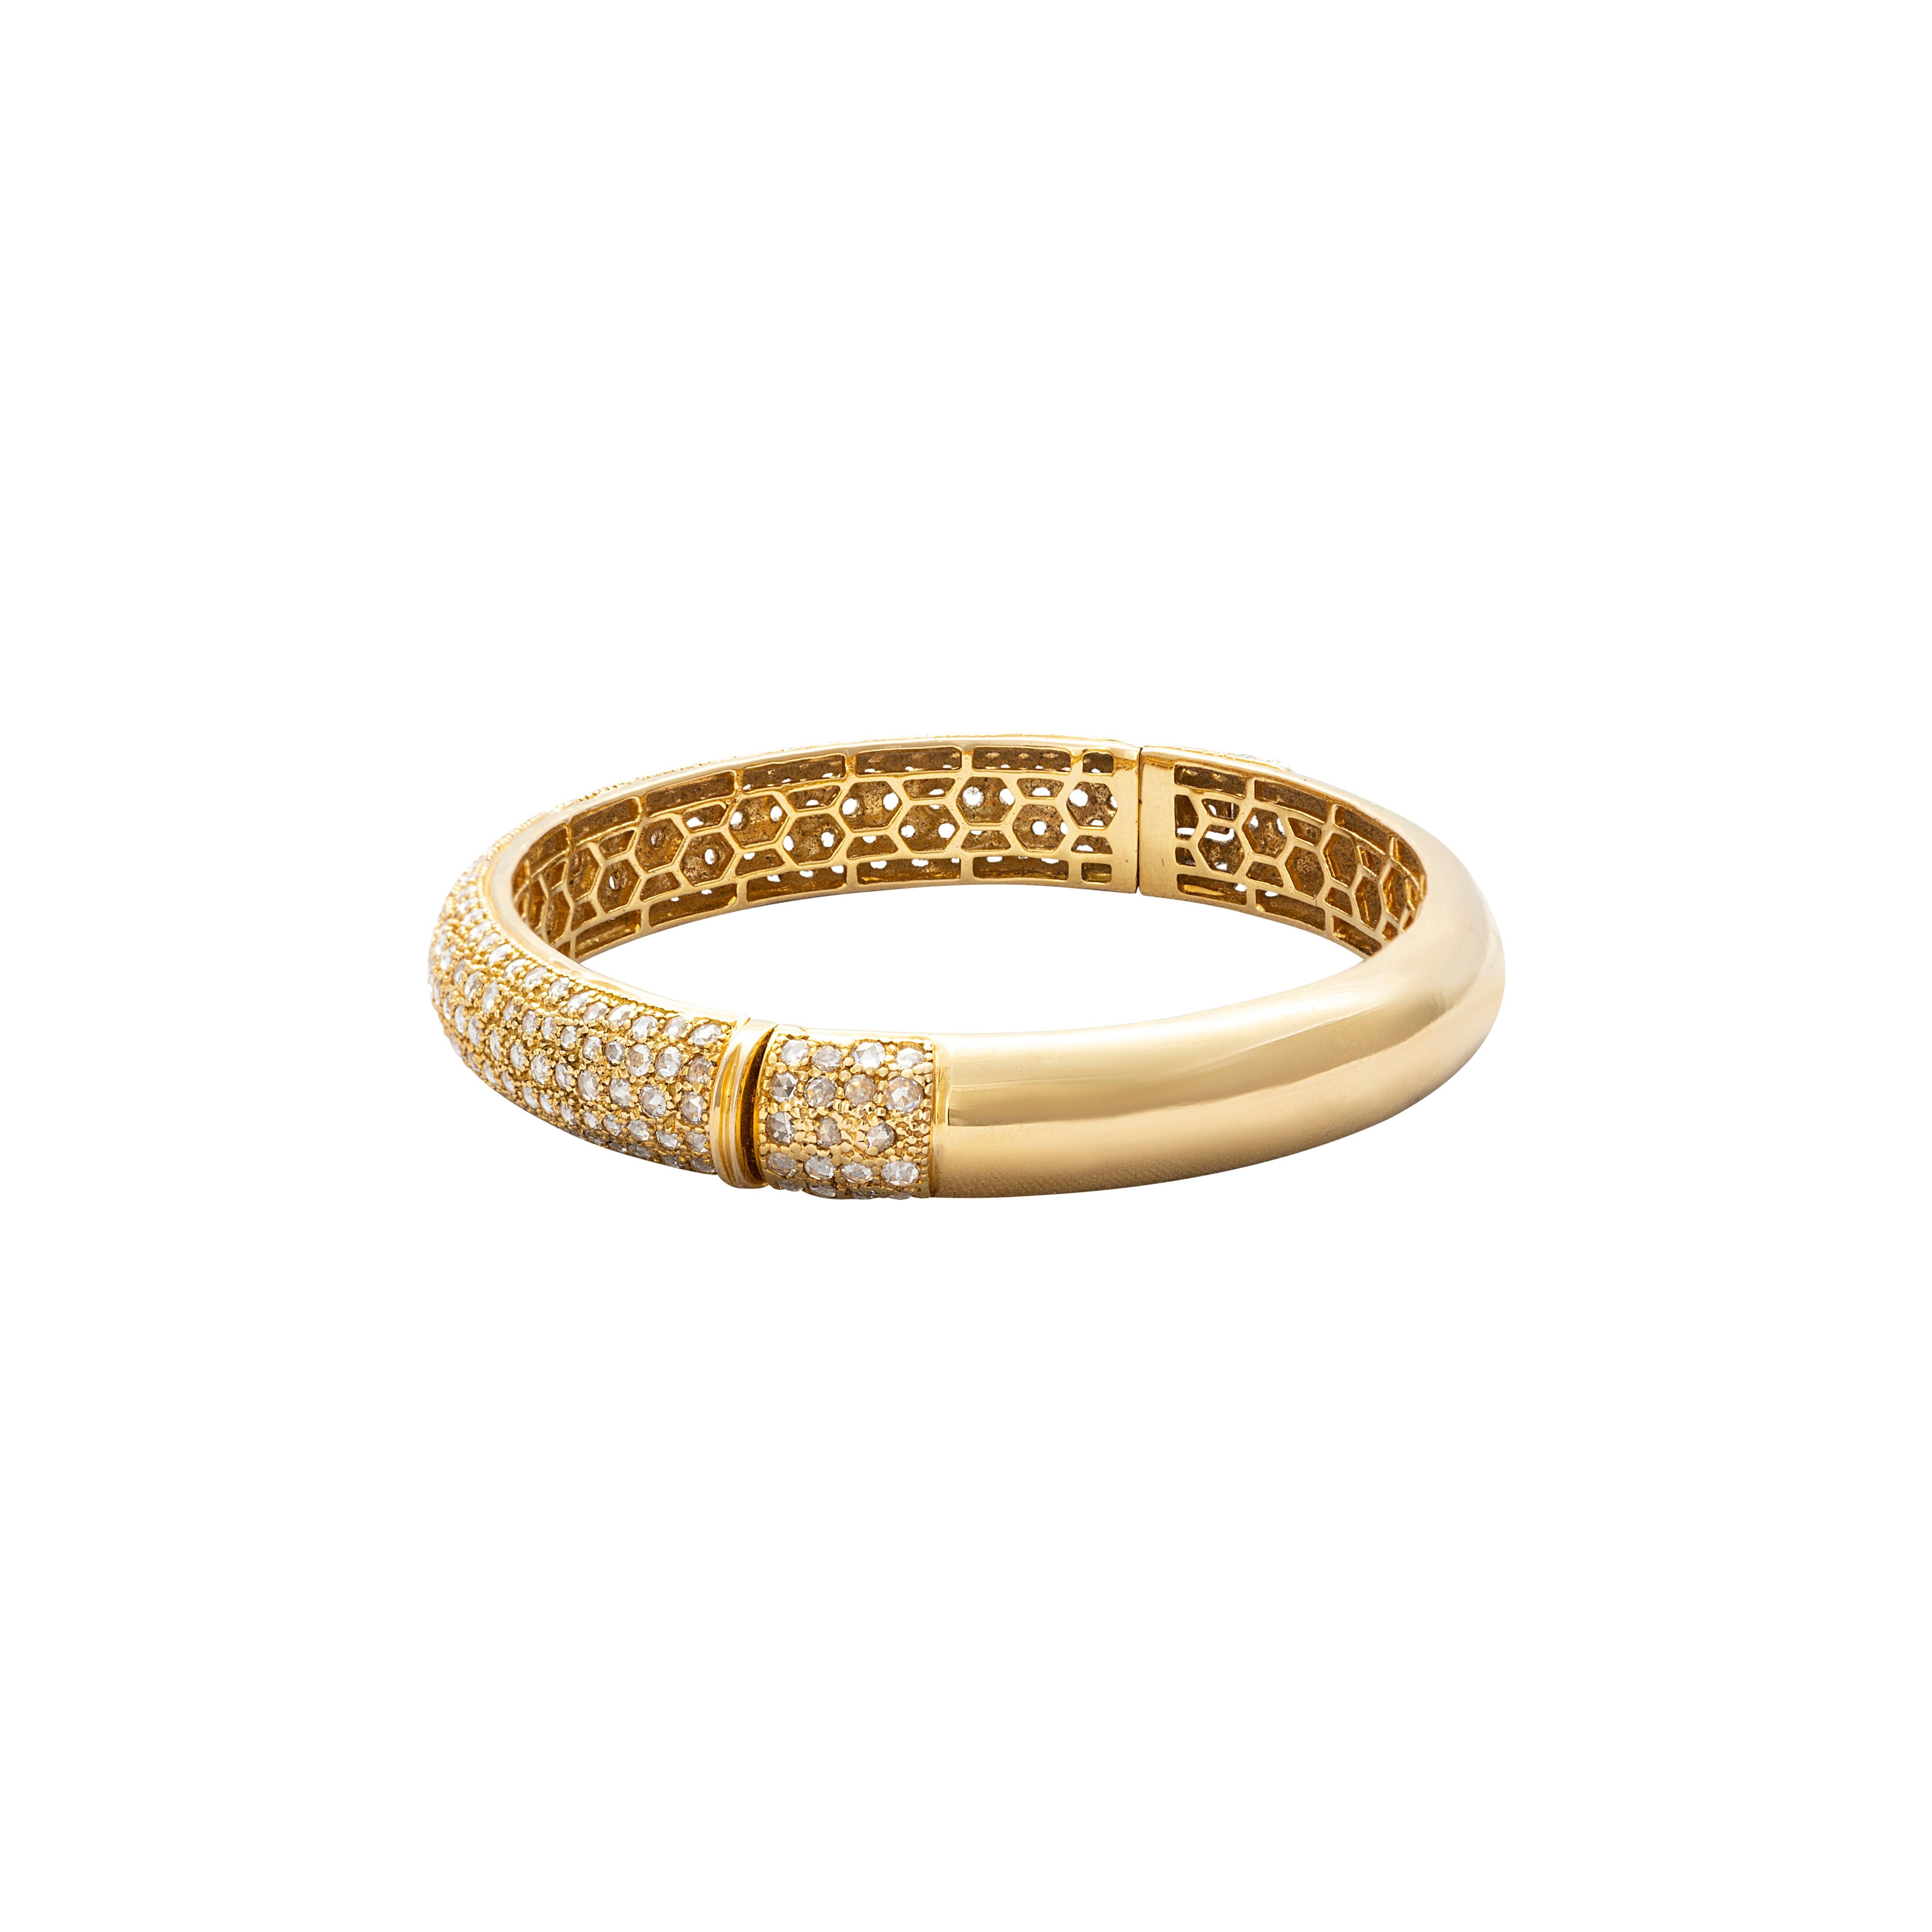 18 Karat Yellow Gold Rosecut Diamond Cuff Bracelet

Beautifully crafted cuff bracelet, set in 18 Karat yellow gold studded with rosecut diamonds. The honeycomb design on the inside is indicative of the workmanship and design that sets this bracelet